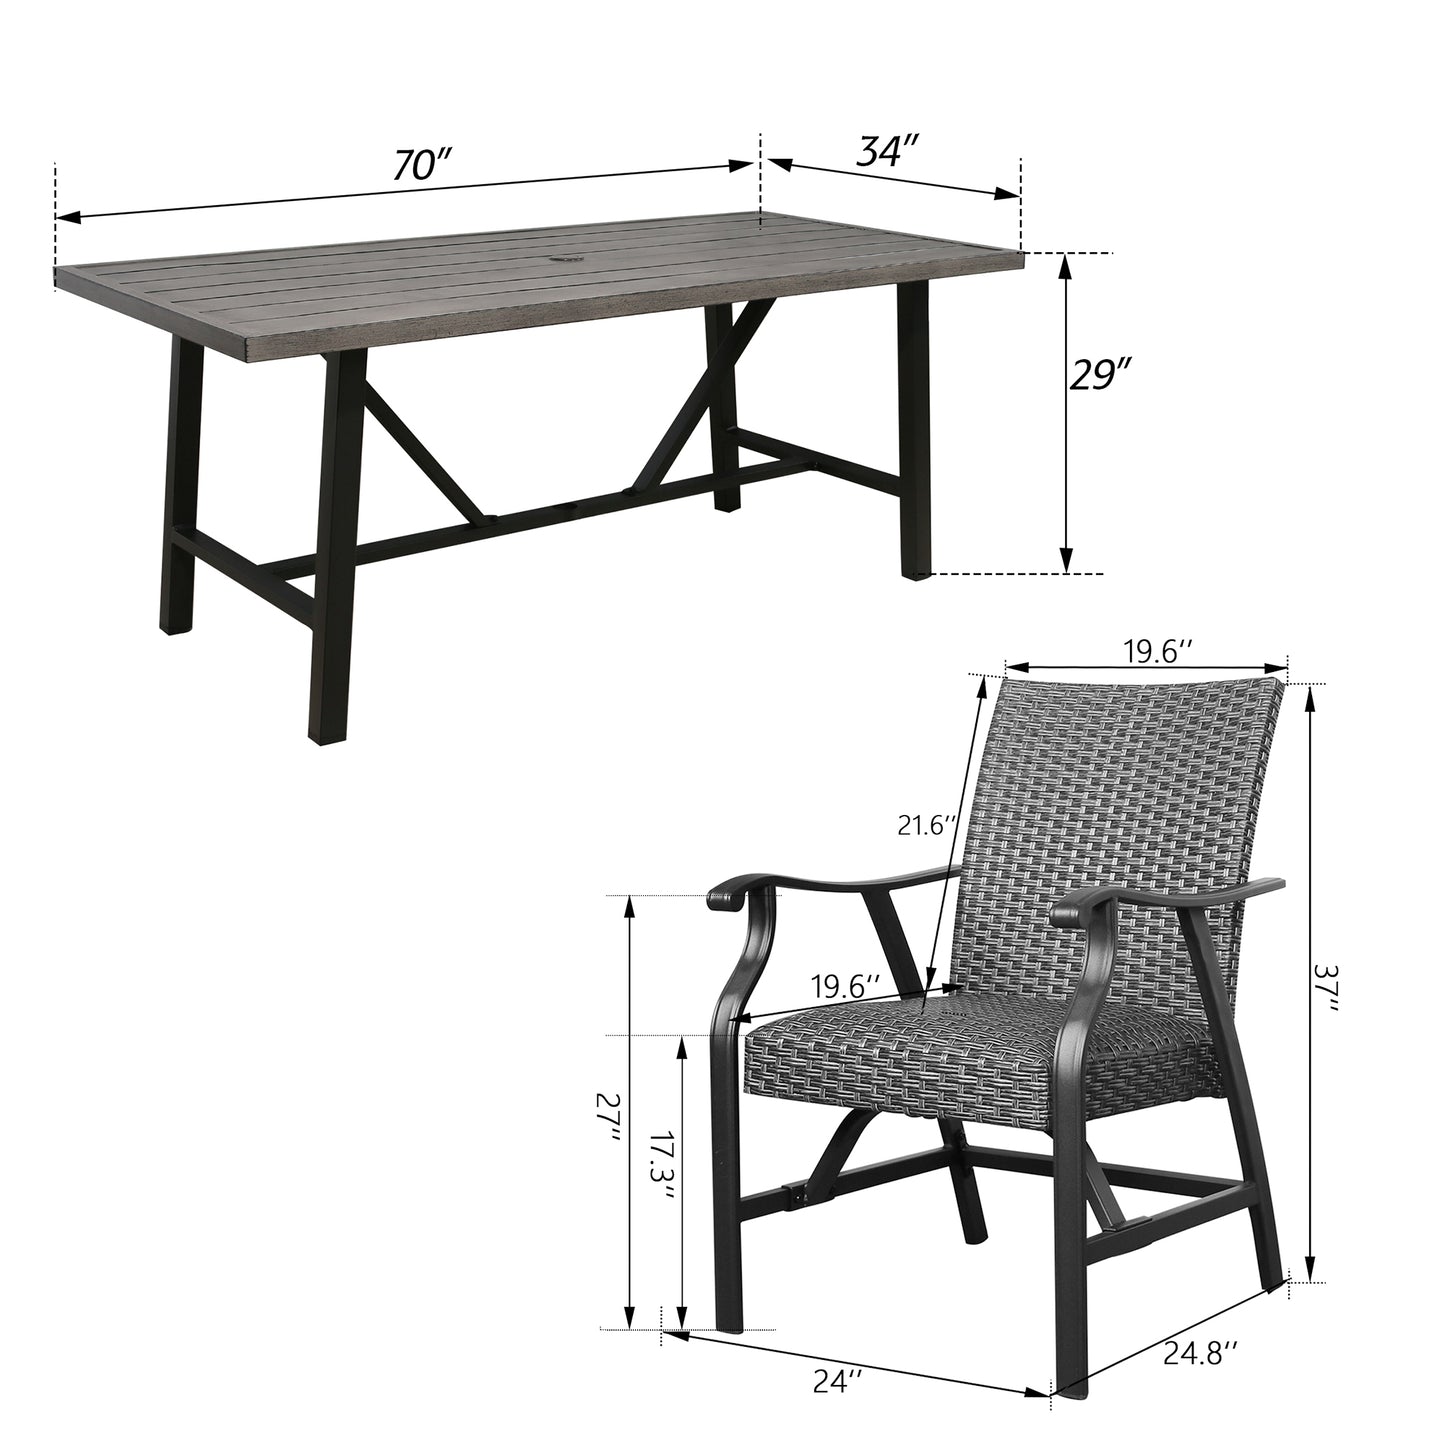 Patio Outdoor 6 Person Metal Dining Set with Aluminum Dining Table and Wicker Motion Rocking Dining Chairs Padded with Quick Dry Foam